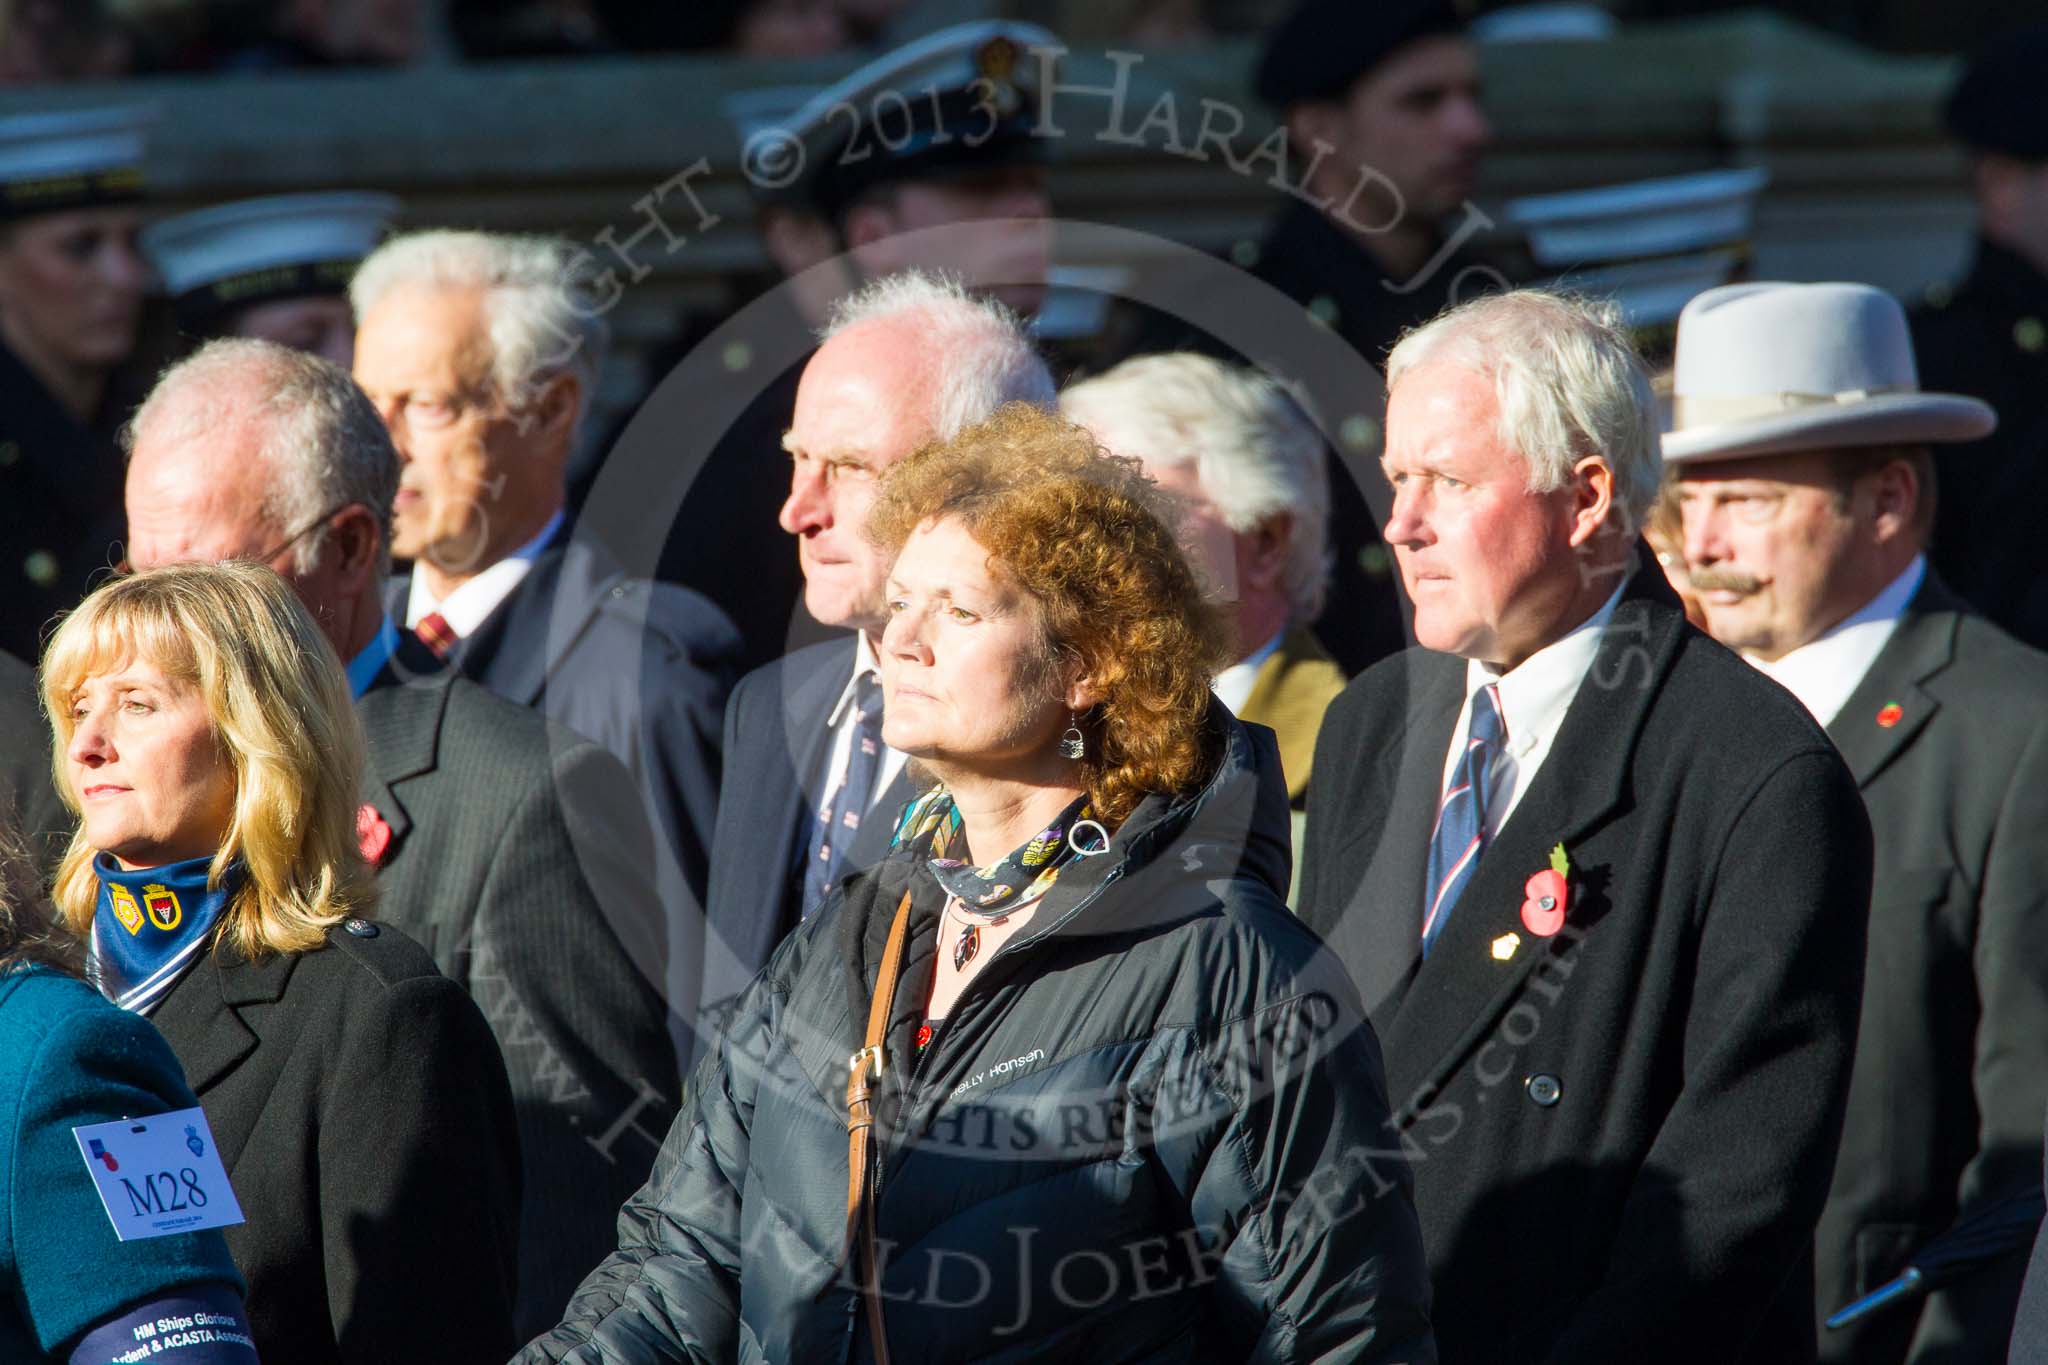 Remembrance Sunday at the Cenotaph in London 2014: Group M28 - HM Ships Glorious Ardent & ACASTA Association.
Press stand opposite the Foreign Office building, Whitehall, London SW1,
London,
Greater London,
United Kingdom,
on 09 November 2014 at 12:18, image #2216